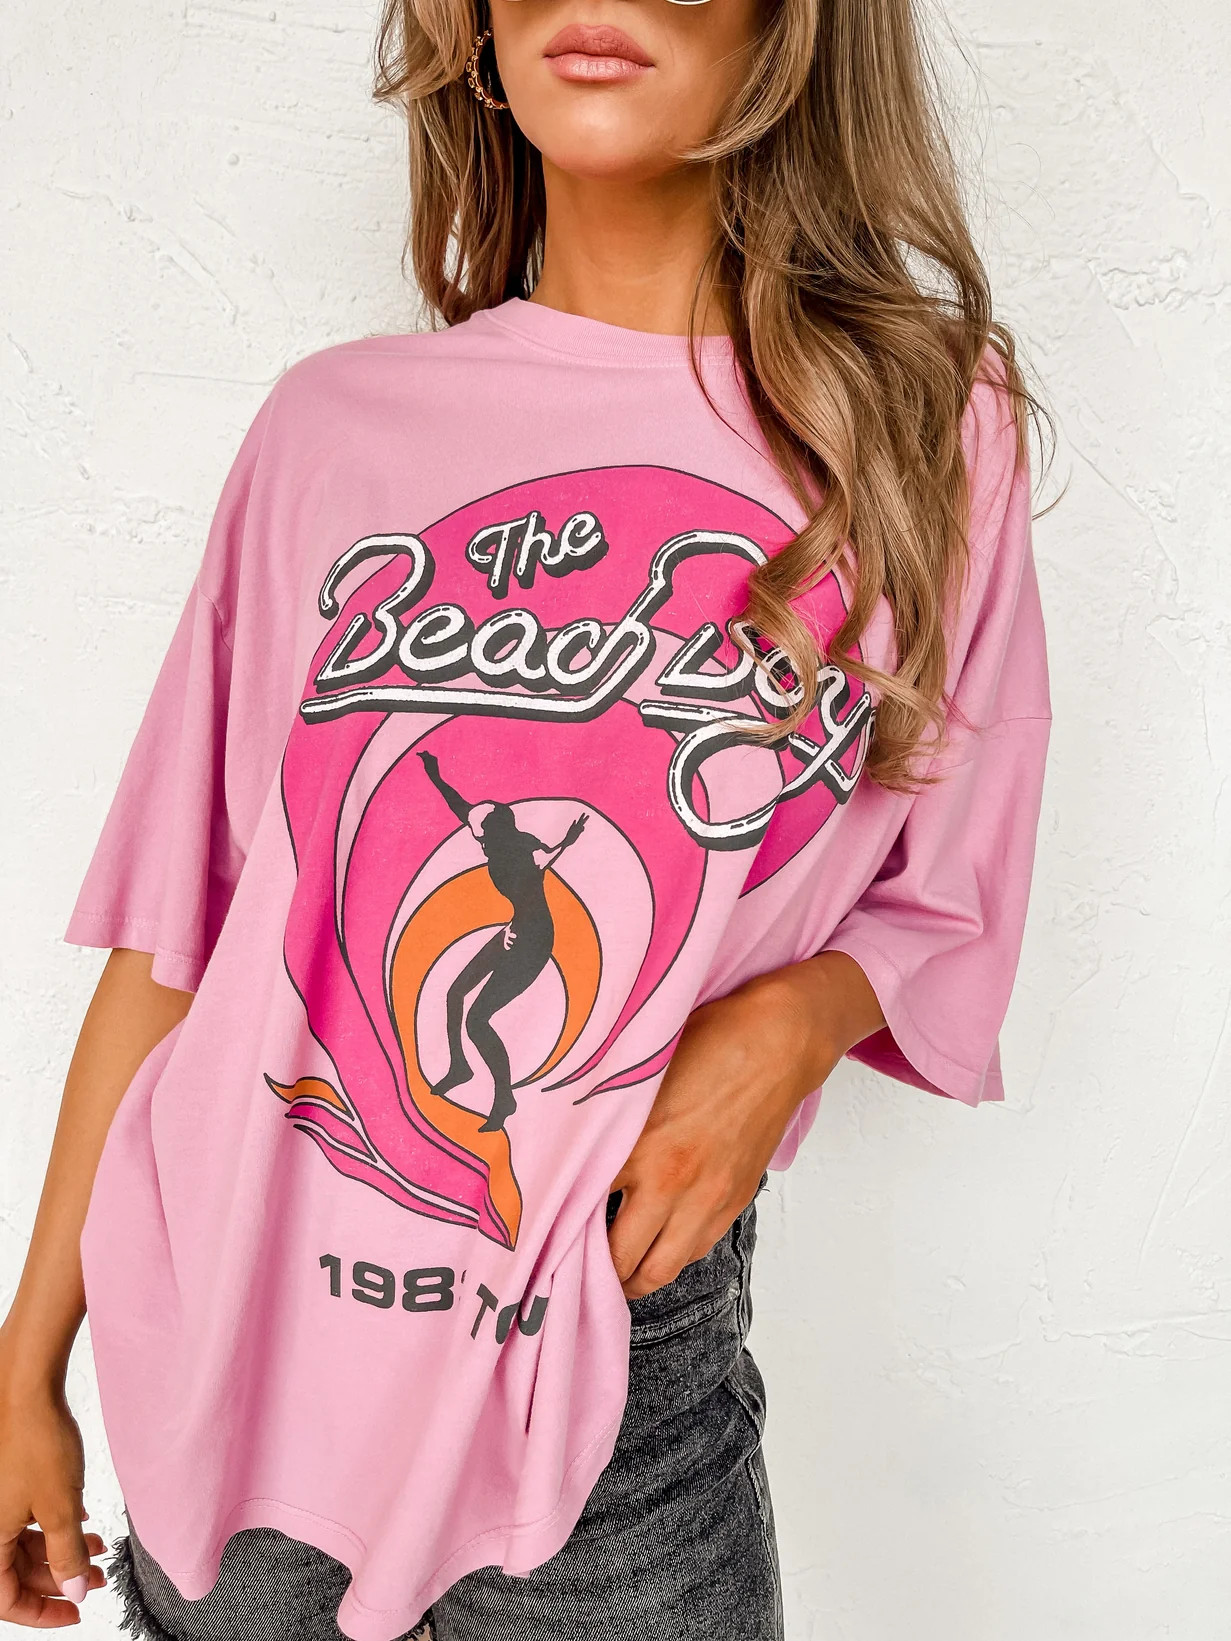 [Daydreamer] The Beach Boys 1983 Tour Oversized TeeOne Size | Ruthie Grace